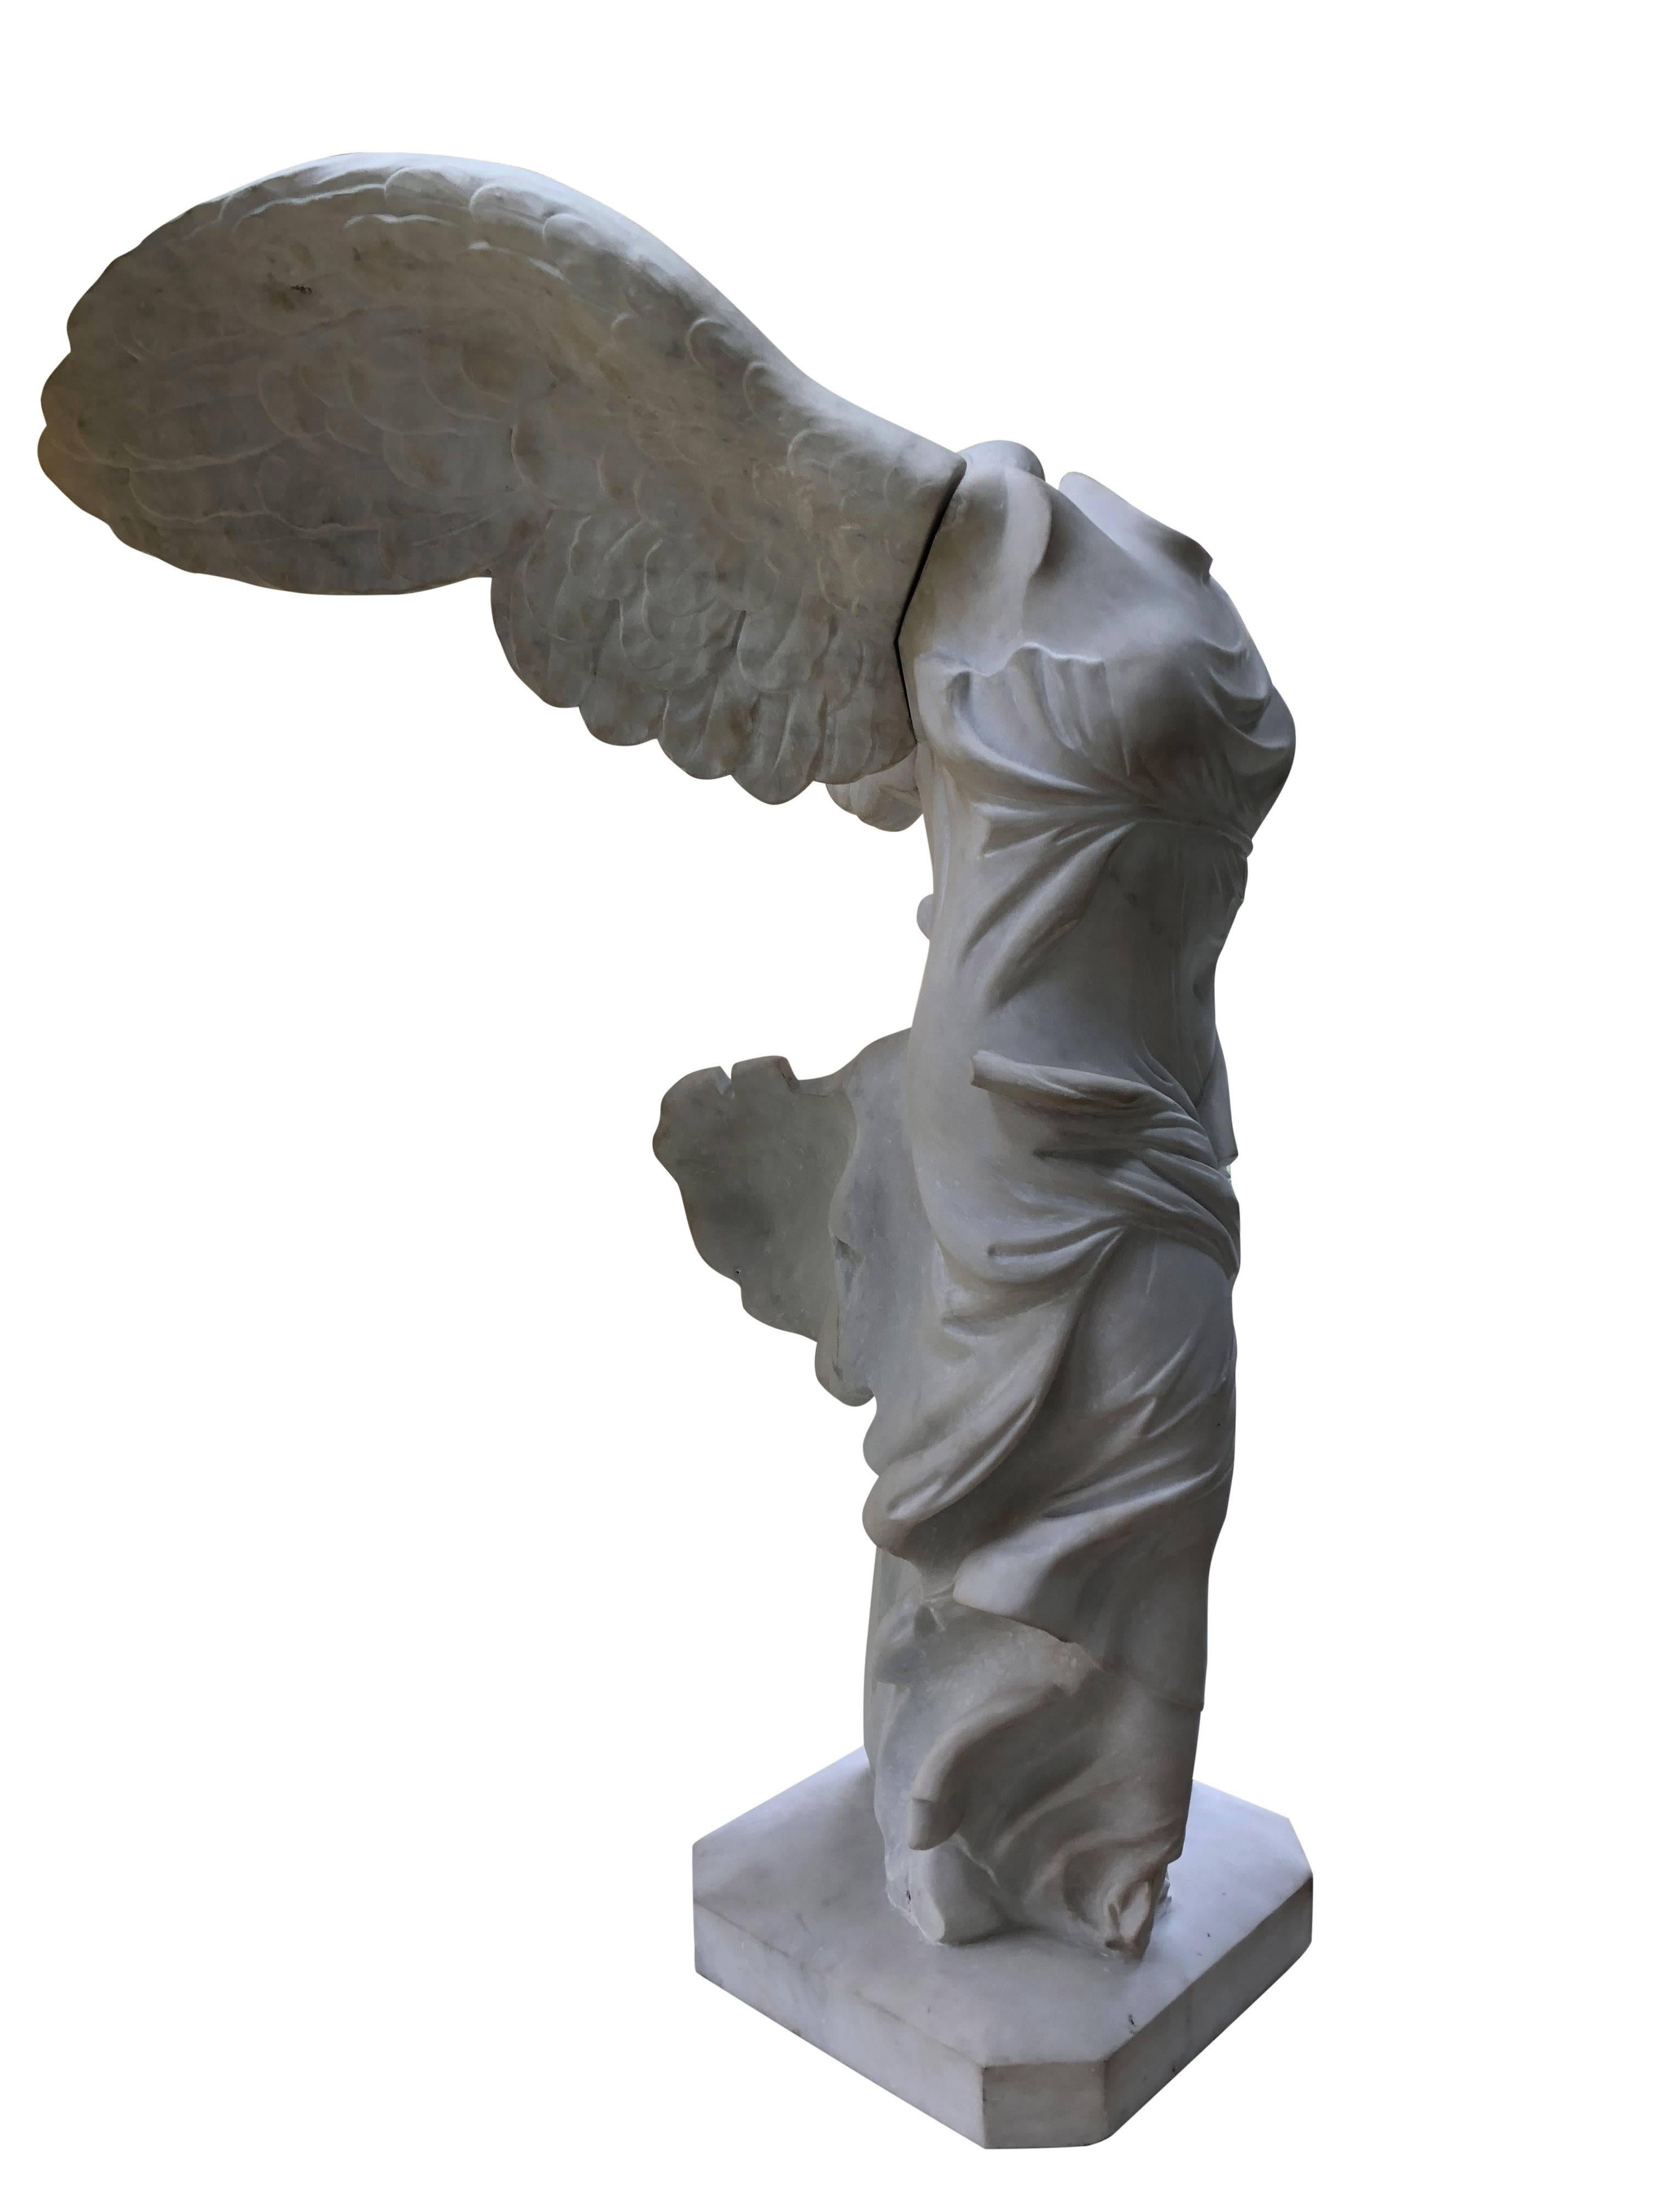 A large and impressive carving of the Winged Victory of Samothrace, also called the NIKE of Samothrace is a second century BC marble sculpture of the Greek goddess NIKE. The original has been prominently displayed at the Louvre in Paris since 1884,